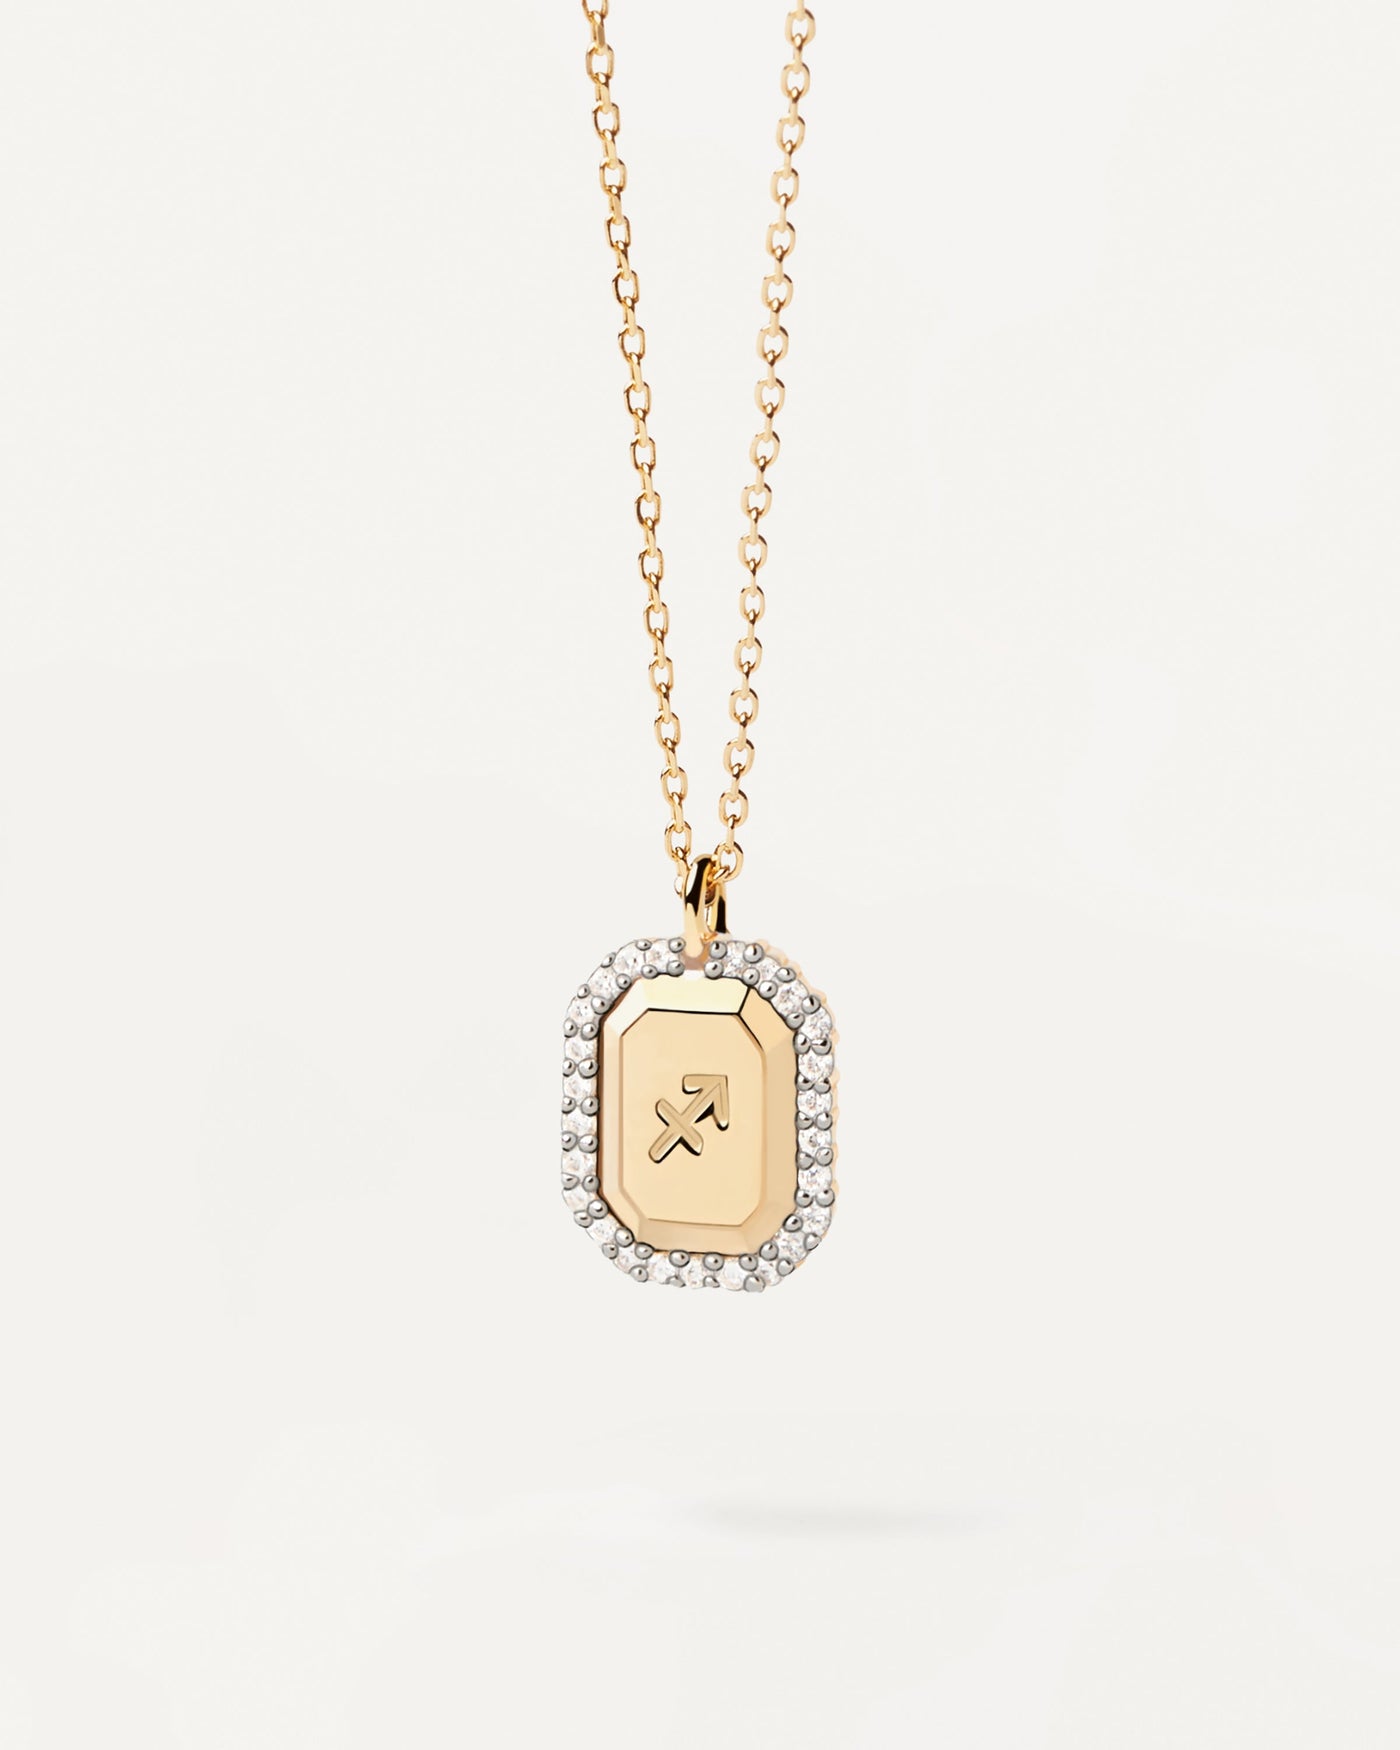 2023 Selection | Sagittarius zodiac sign necklace in gold-plated silver with zirconia pendant. Get the latest arrival from PDPAOLA. Place your order safely and get this Best Seller. Free Shipping.